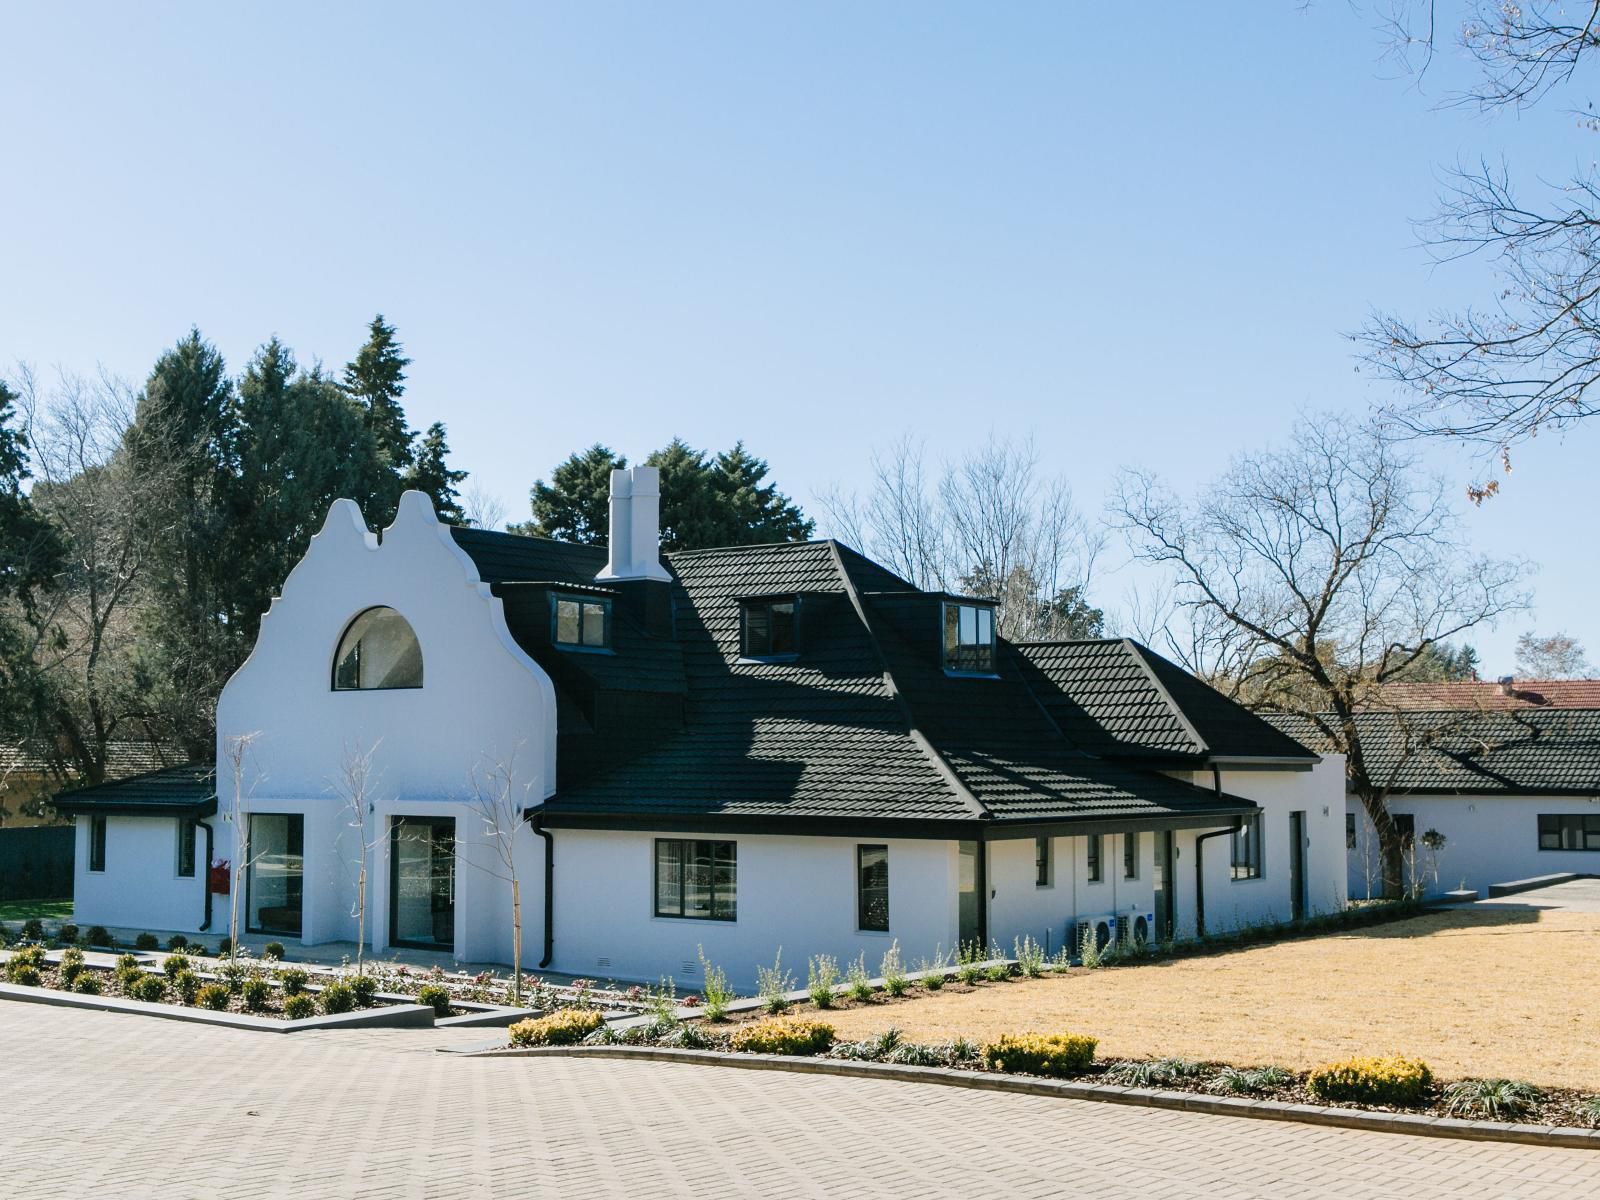 30 On Whites Guesthouse Waverley Bloemfontein Free State South Africa Building, Architecture, House